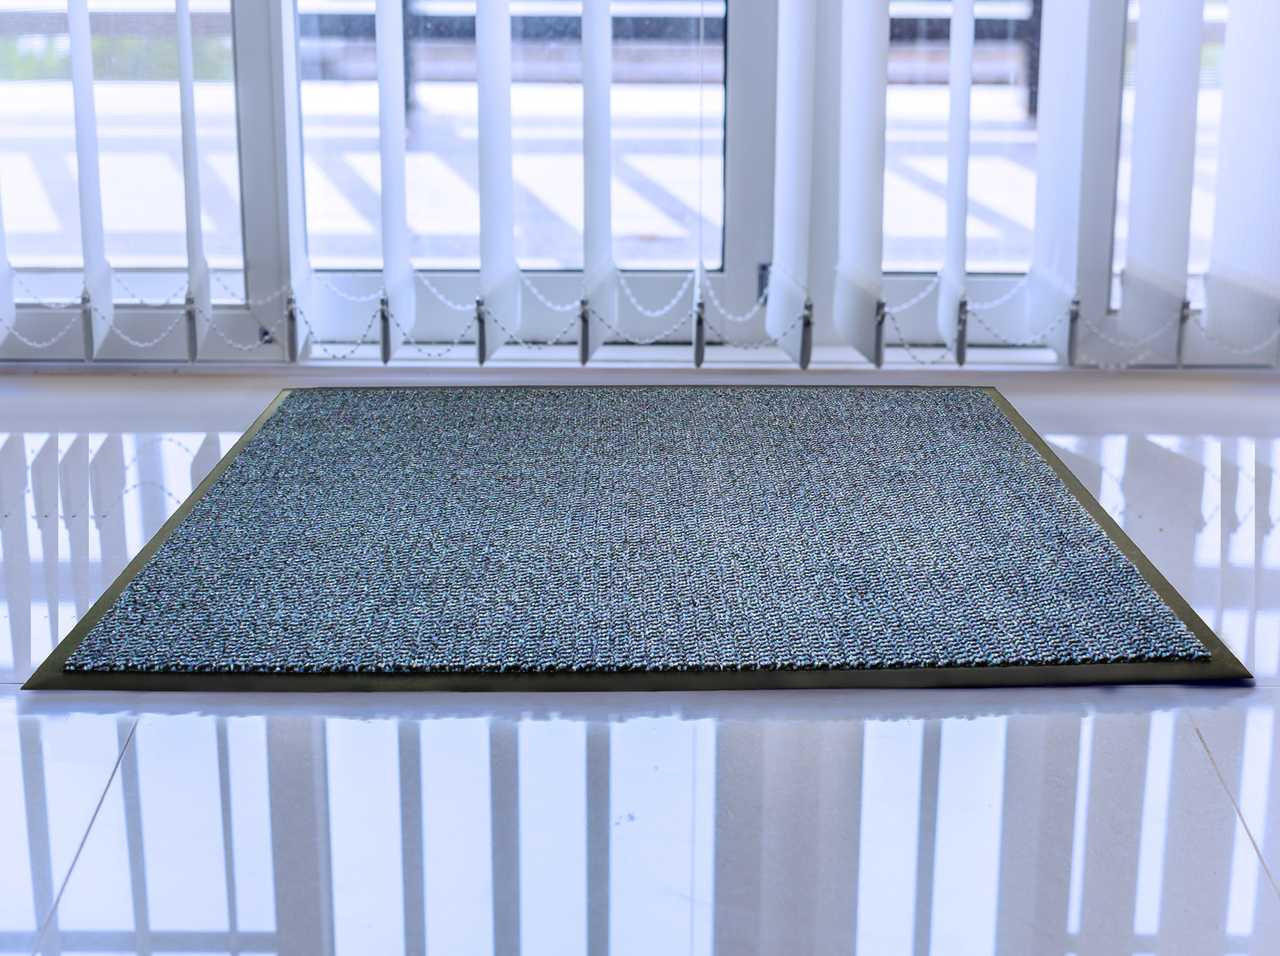 https://cdn11.bigcommerce.com/s-fjwps1jbkv/images/stencil/1280x1280/products/143/3984/ultralux-indoor-entrance-mat-or-polypropylene-fibers-and-anti-slip-vinyl-backed-entry-rug-doormat-or-blue__02163.1689079790.jpg?c=2?imbypass=on